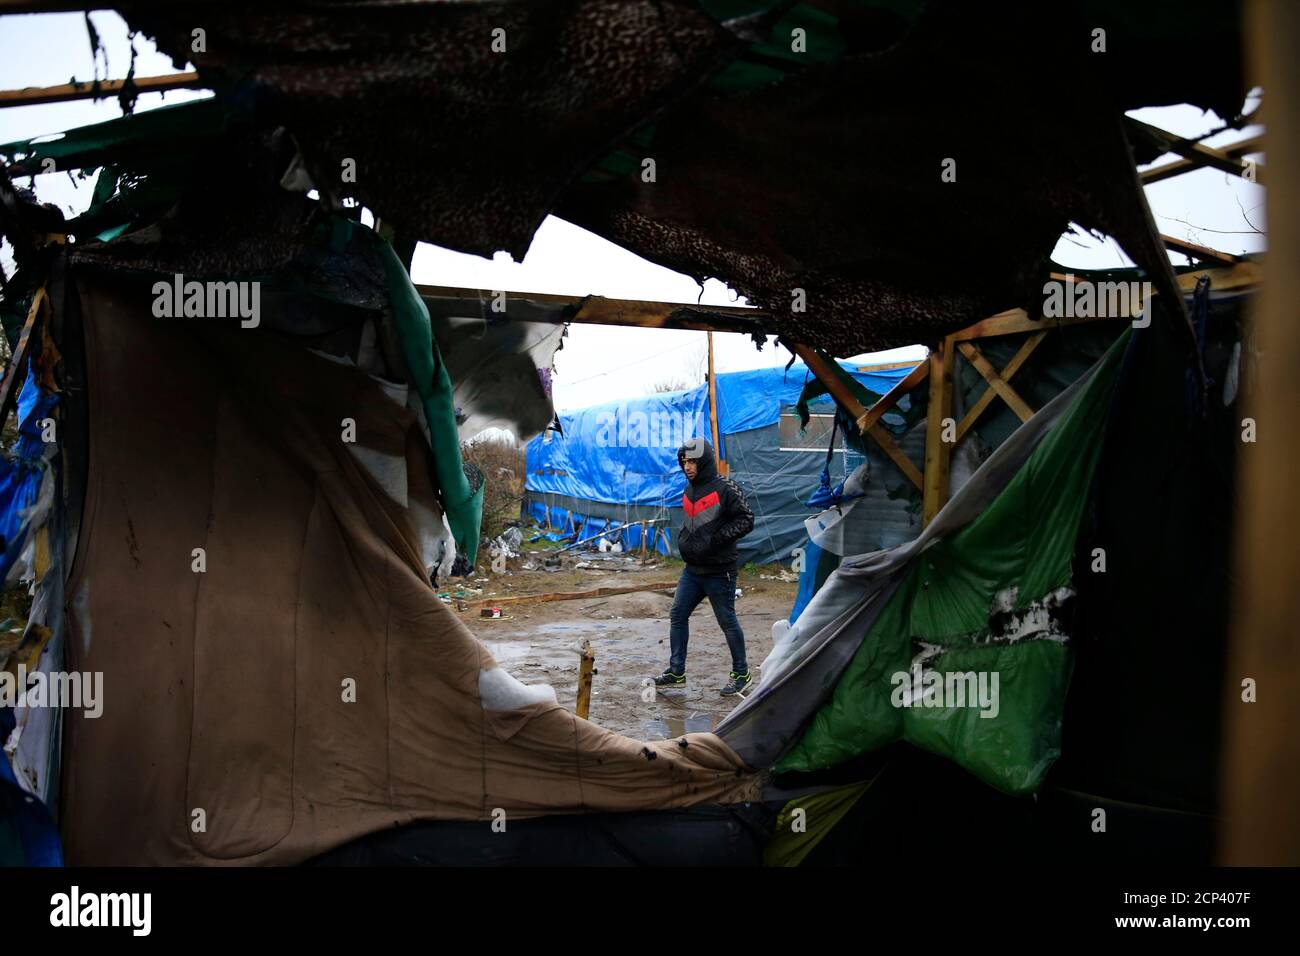 A migrant walks past makeshift shelters during the partial dismantlement of the camp for migrants called the 'Jungle' in Calais, France, March 1, 2016.   REUTERS/Pascal Rossignol Stock Photo